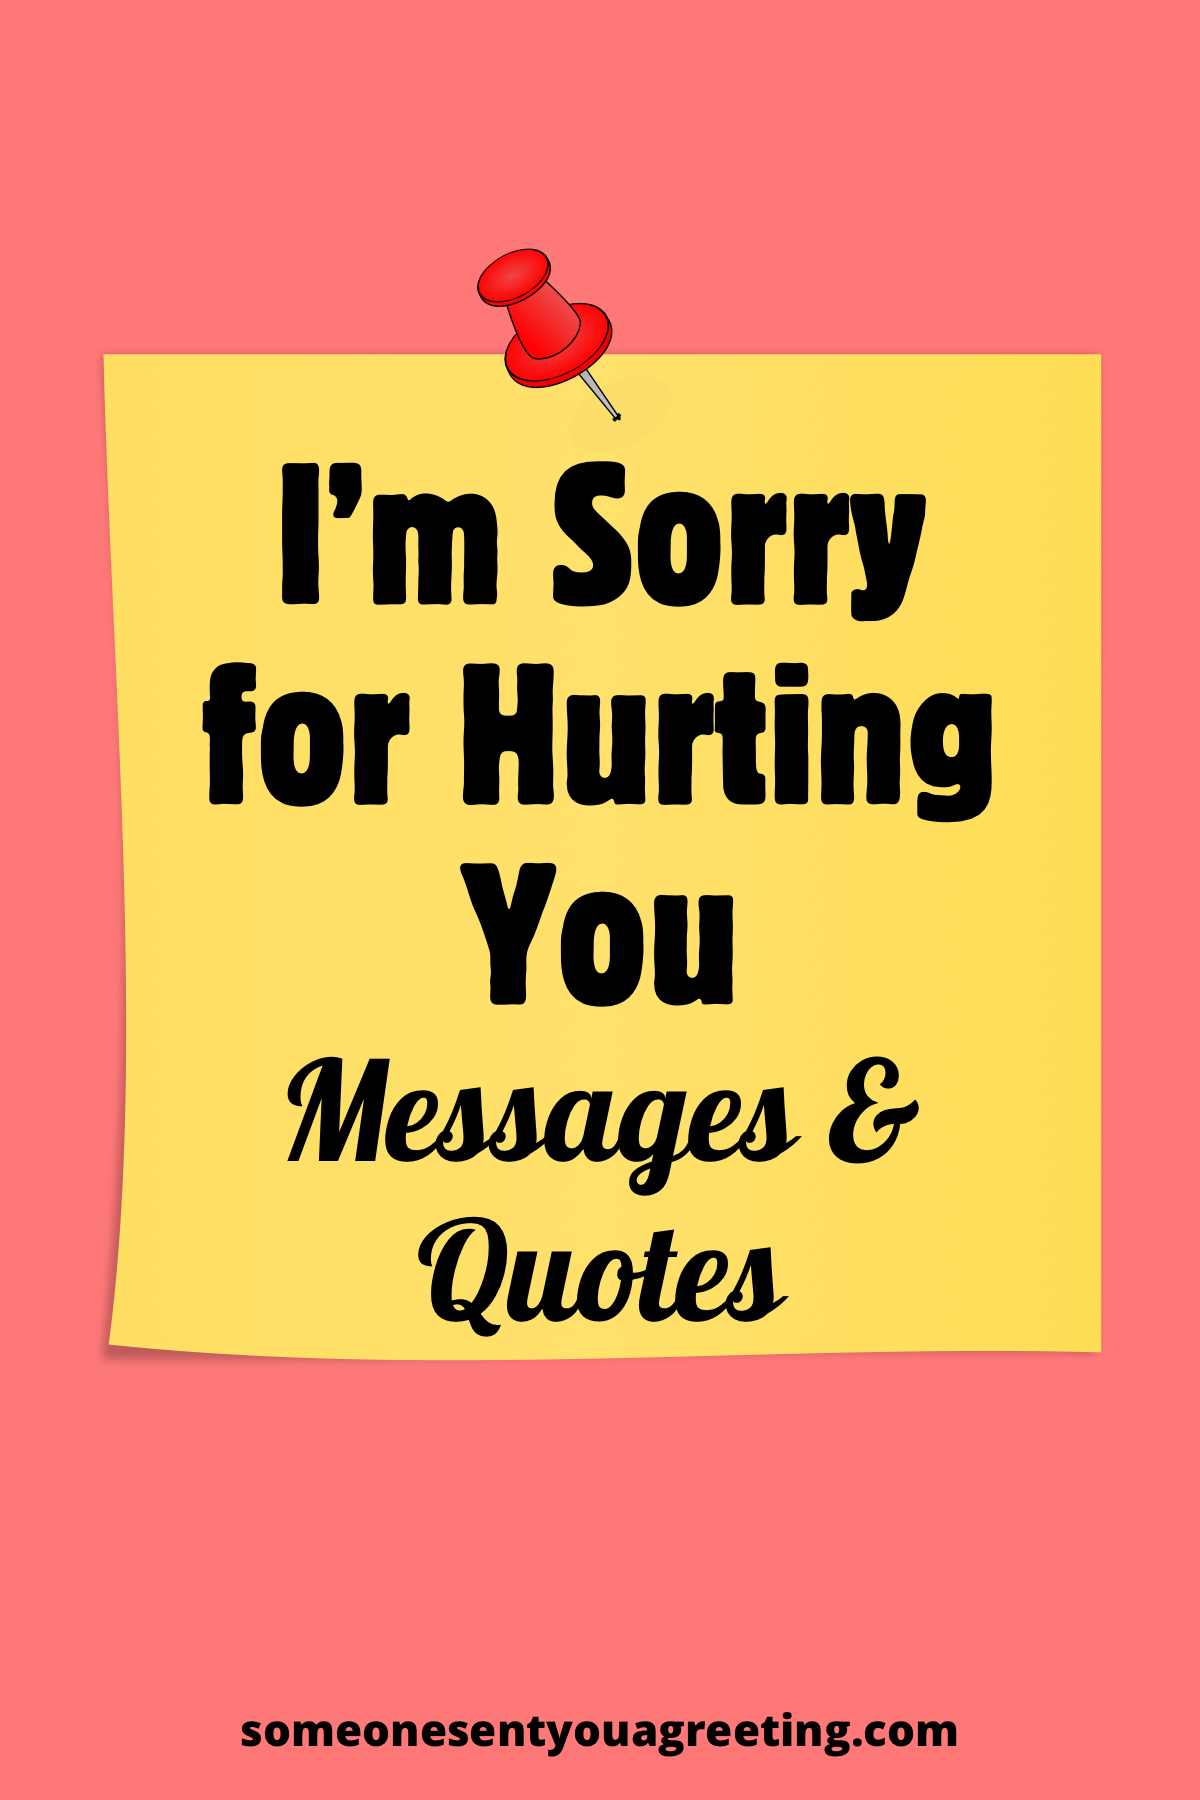 I'm sorry for hurting you messages